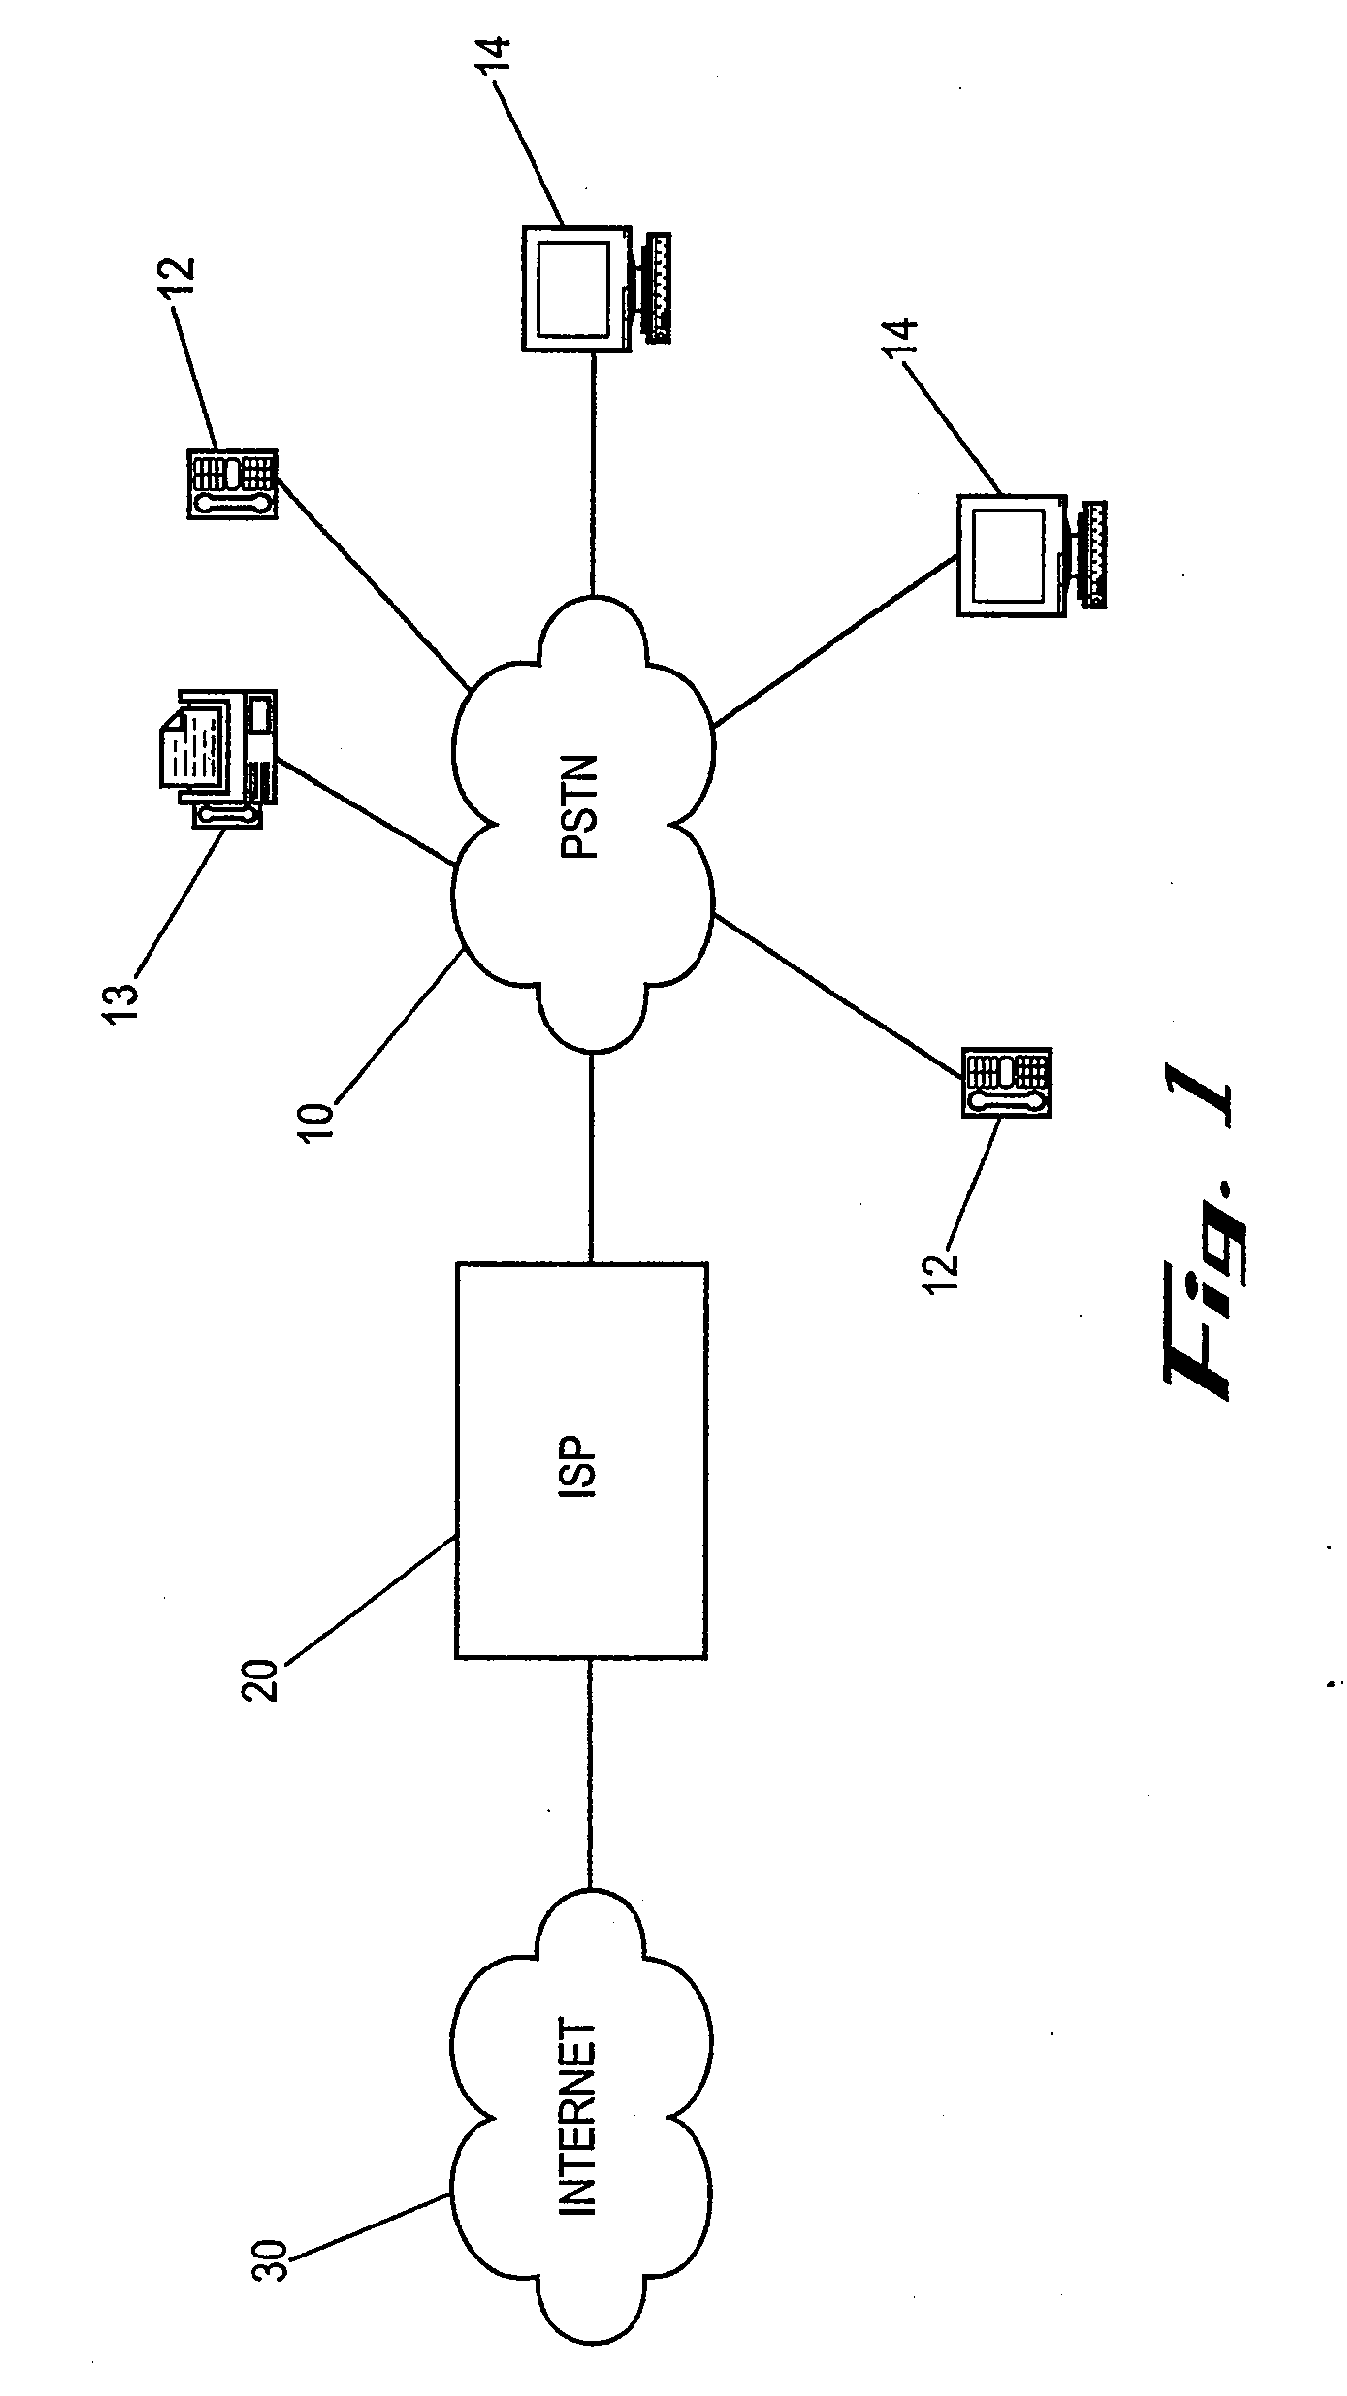 Networks, Systems and Methods for Routing Data Traffic Within a Telephone Network Based on Available Resources